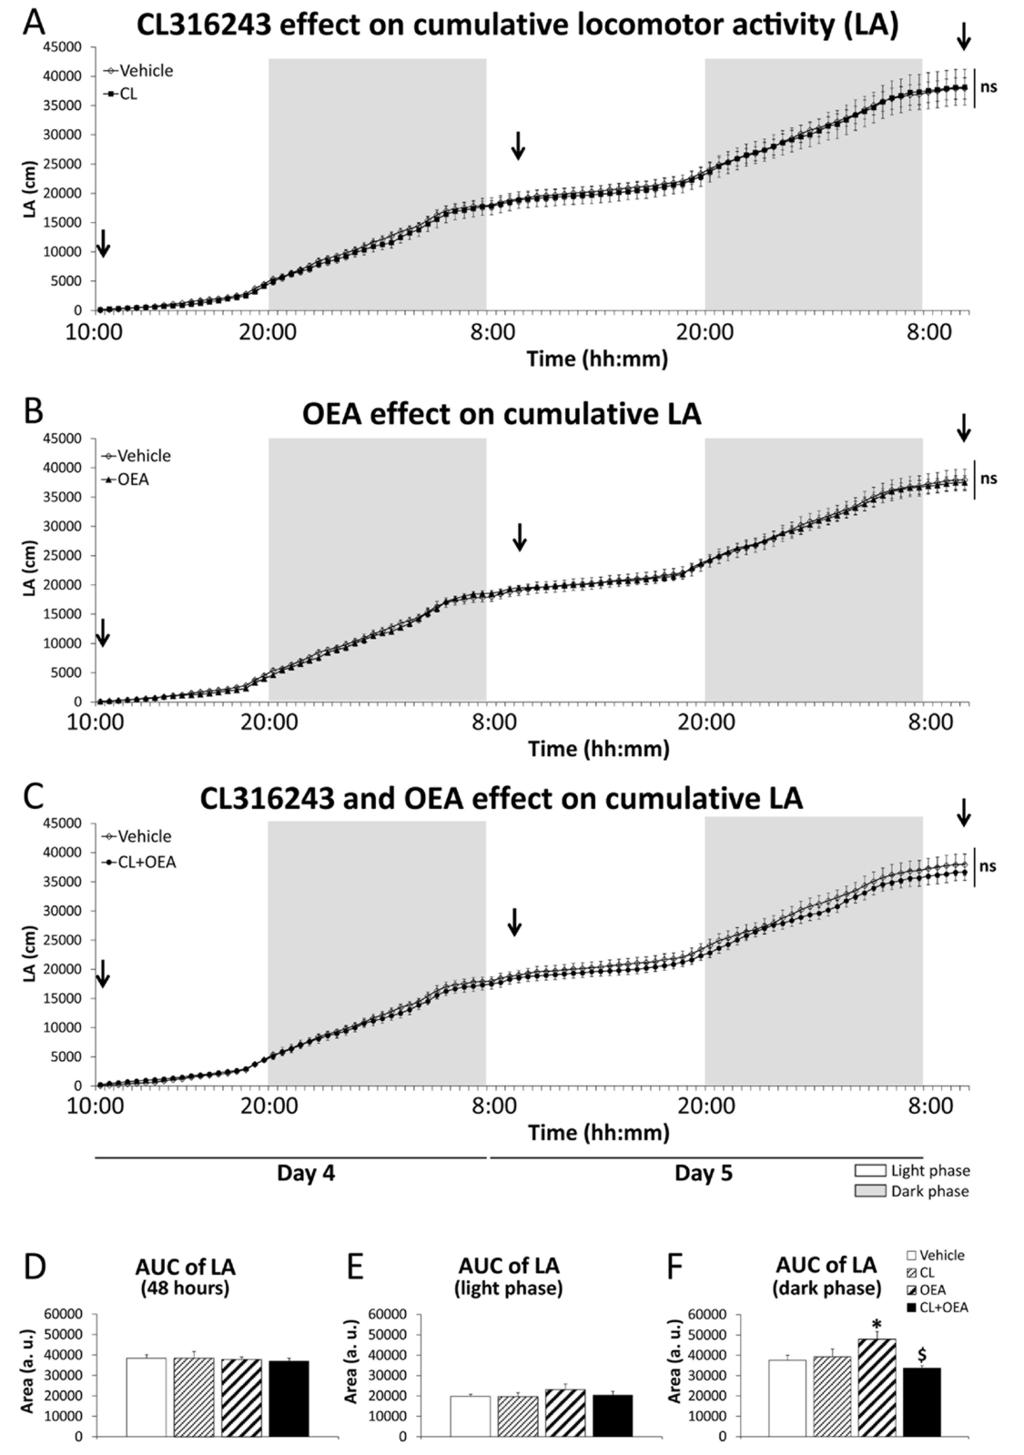 Fig. S3. Effects of repeated administration of CL316243 (1 mg/kg) and/or OEA (5 mg/kg) on cumulative locomotor activity (LA) (A-C) for 48 hours after 4 days of treatment.